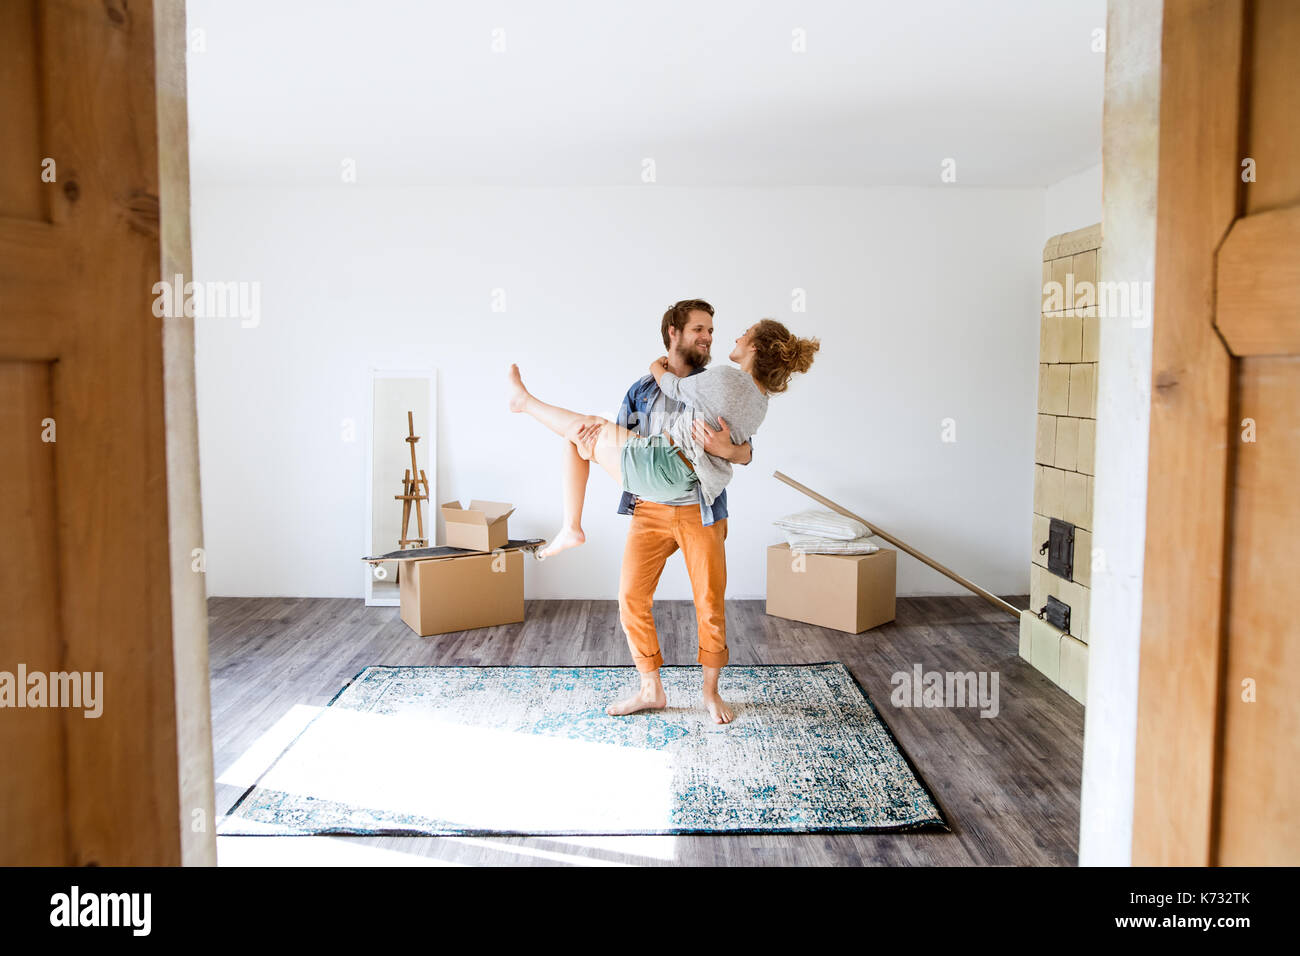 Man carrying woman in his arms, moving in new house. Stock Photo